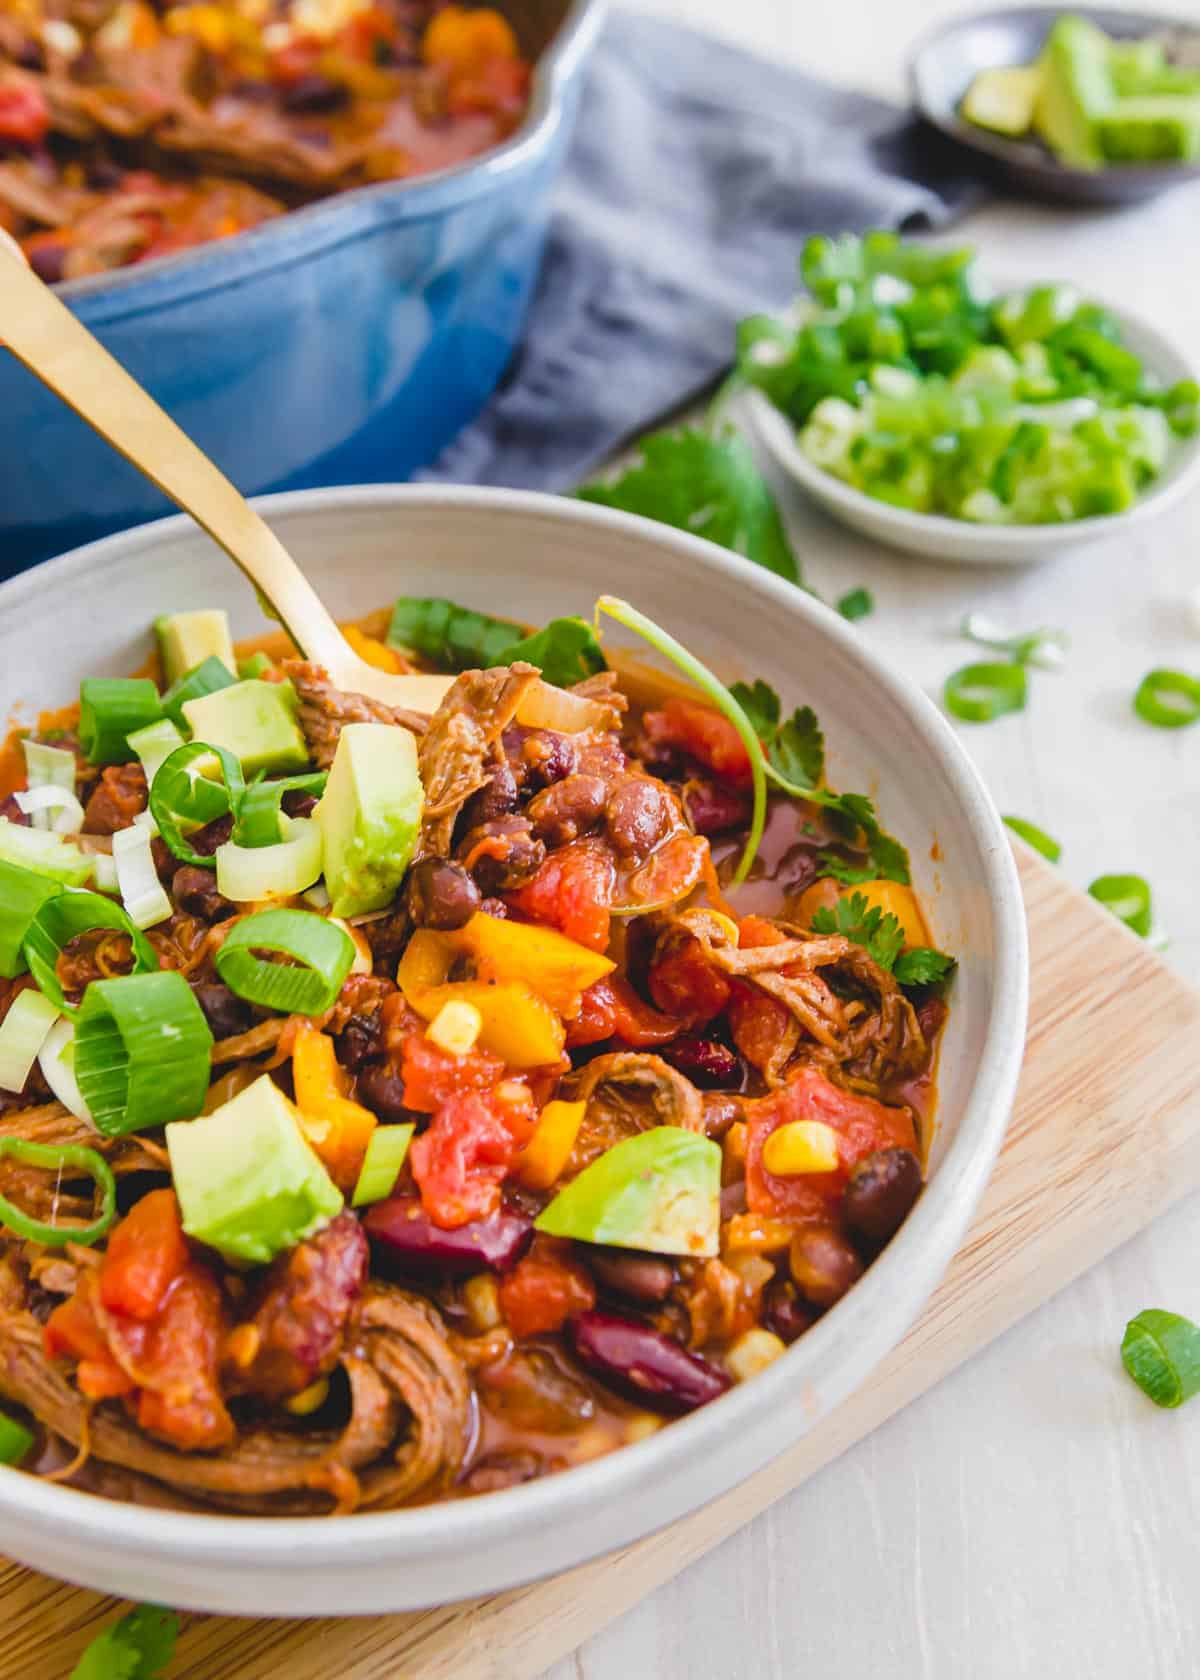 Use leftover Instant Pot brisket as the base for this easy brisket chili recipe filled with beans, peppers, tomatoes and corn.